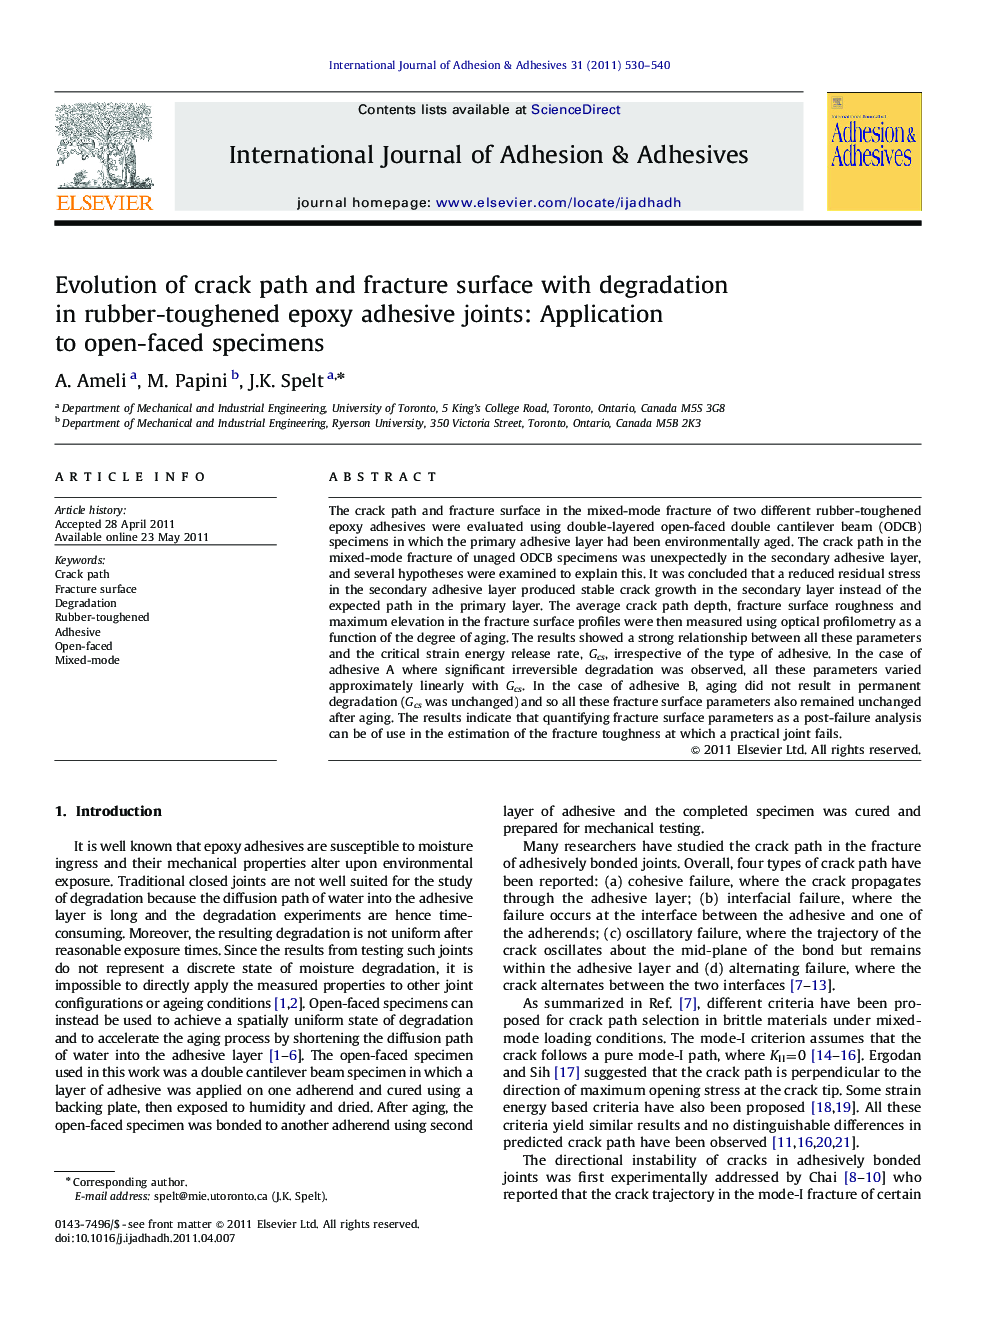 Evolution of crack path and fracture surface with degradation in rubber-toughened epoxy adhesive joints: Application to open-faced specimens